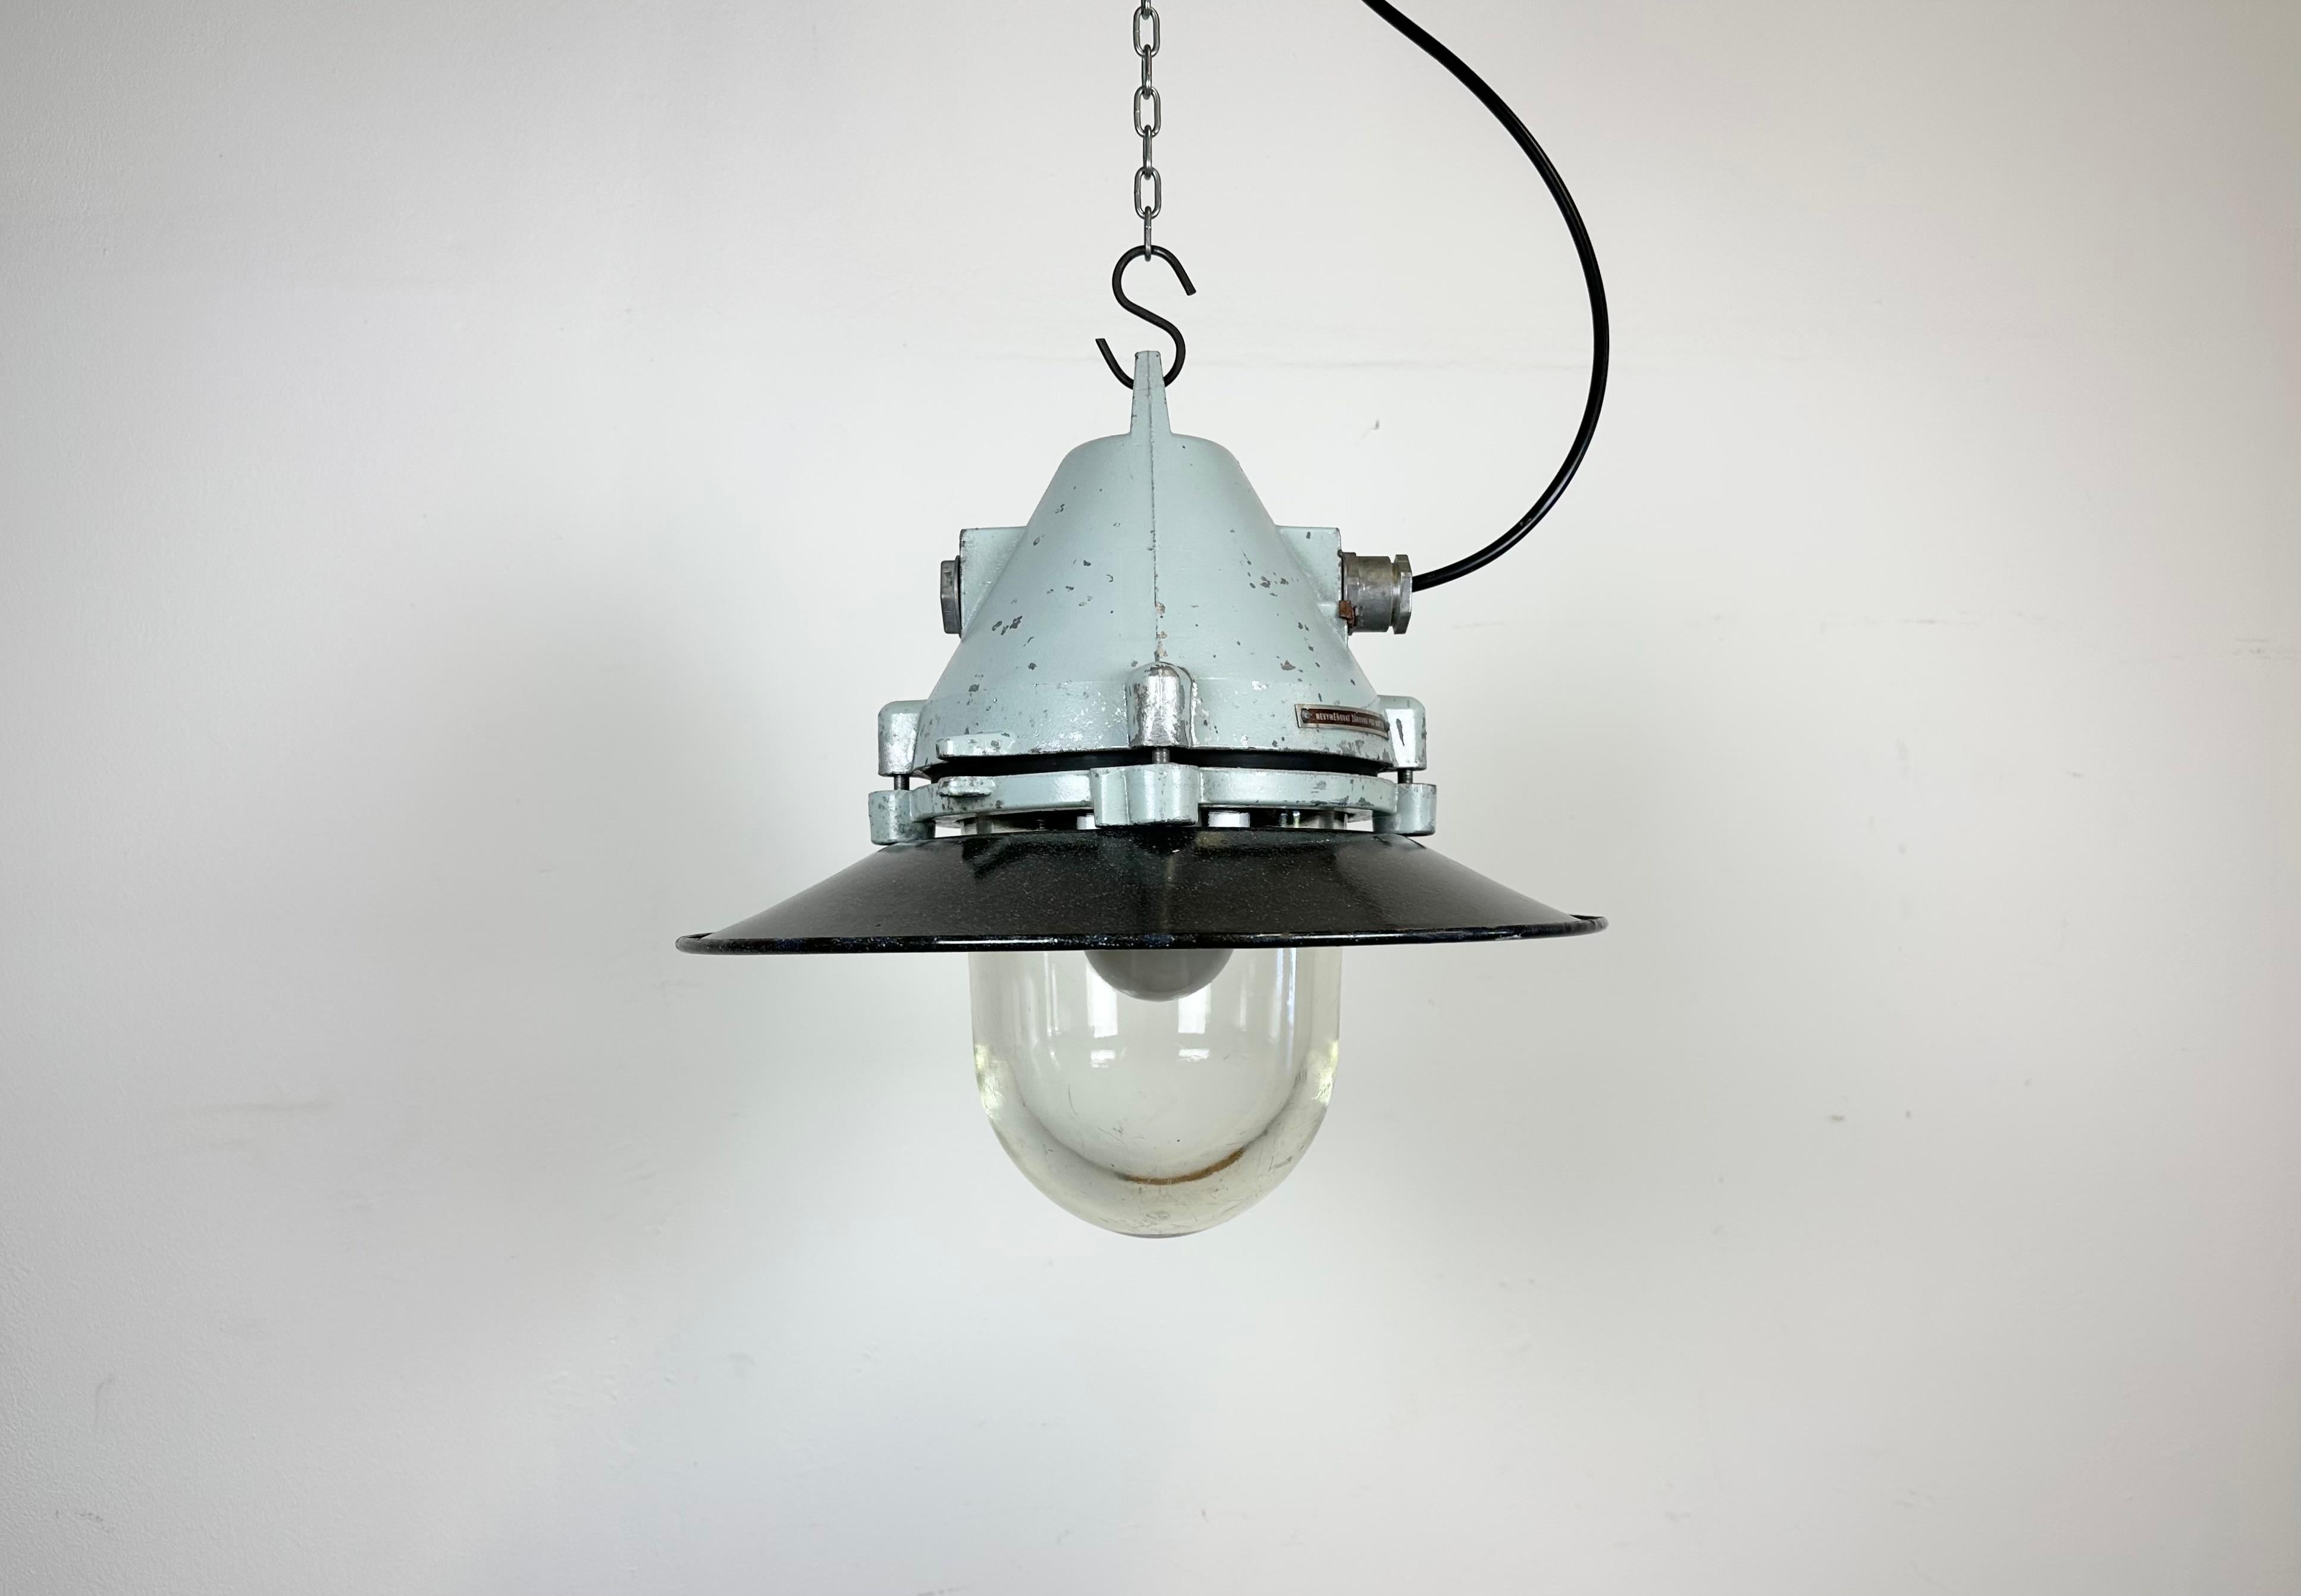 Grey industrial lamp with massive protective glass bulb made by Elektrosvit in former Czechoslovakia during the 1970s.It features a grey cast aluminium body, a clear glass and a grey enameled shade with white interior. Porcelain socket requires E27/